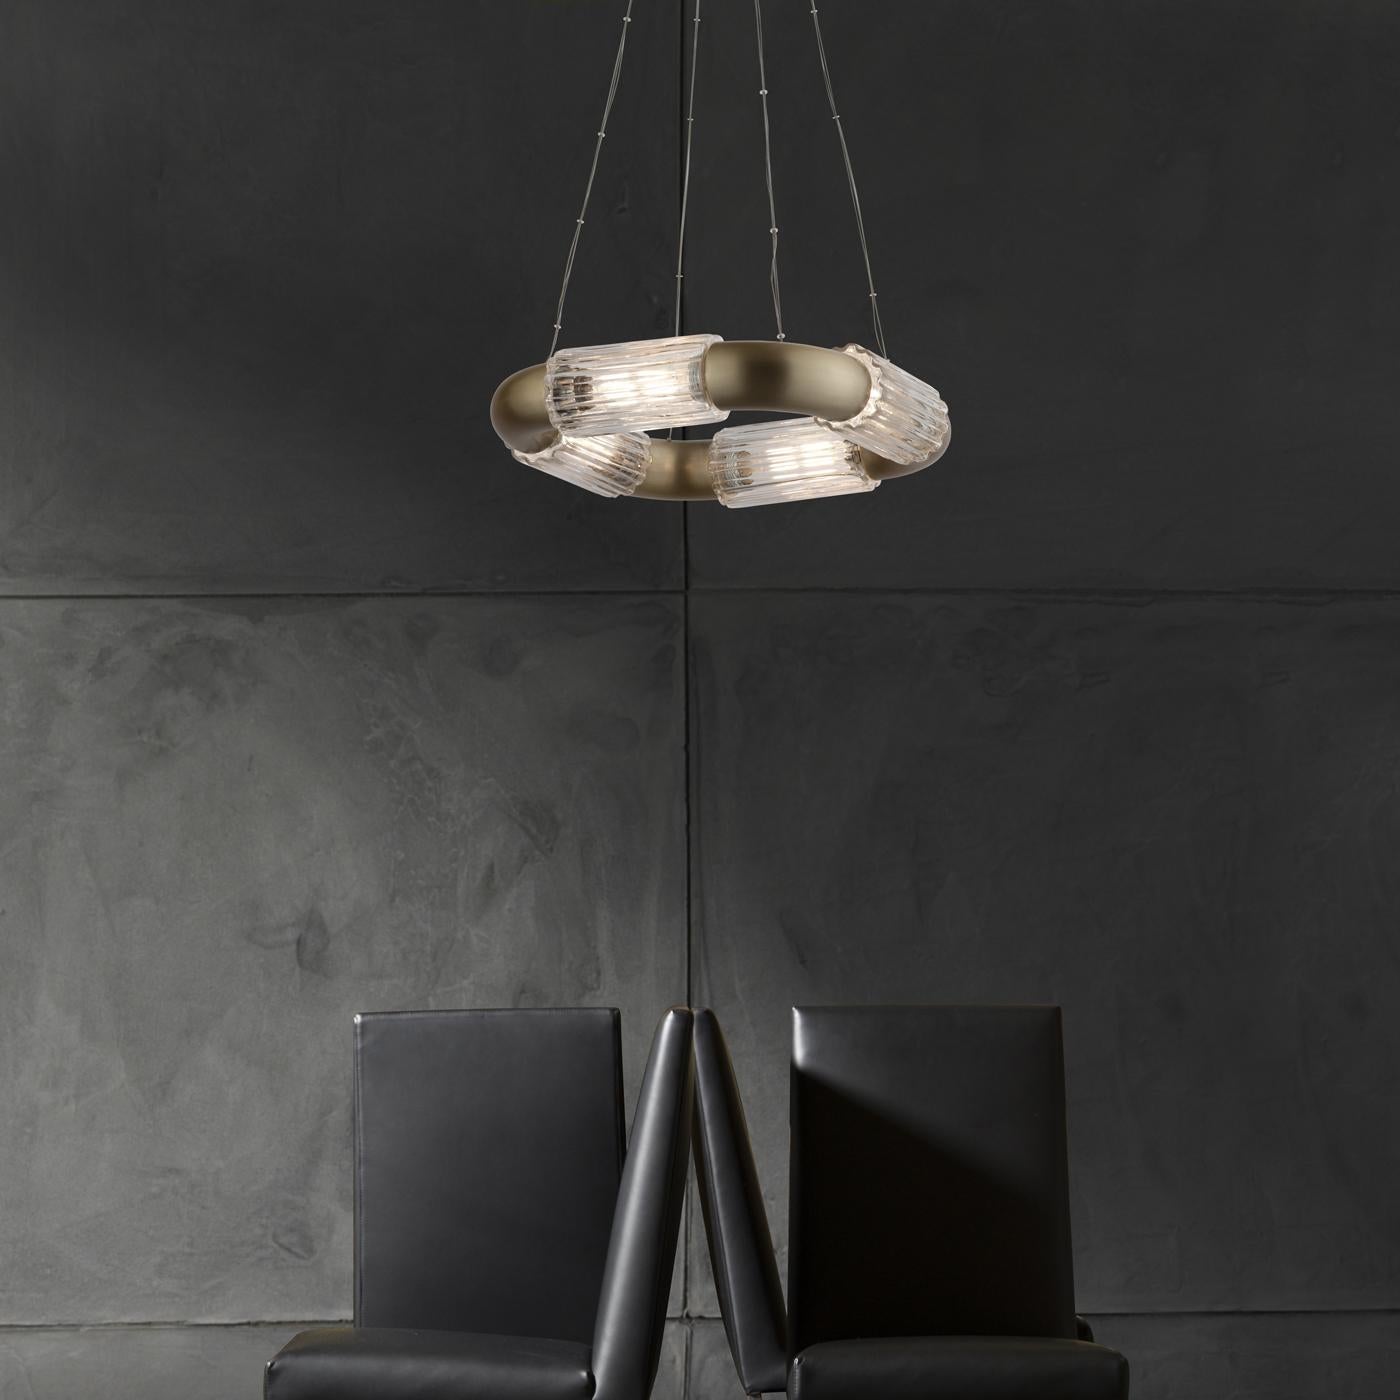 Suspended from thin metal wires, this stunning pendant lamp showcases a horizontal frame alternating cylindrical sections in satin brass with four cylindrical grooved diffusers, each hosting a tubular LED source (E14 and 4W each). Thanks to its